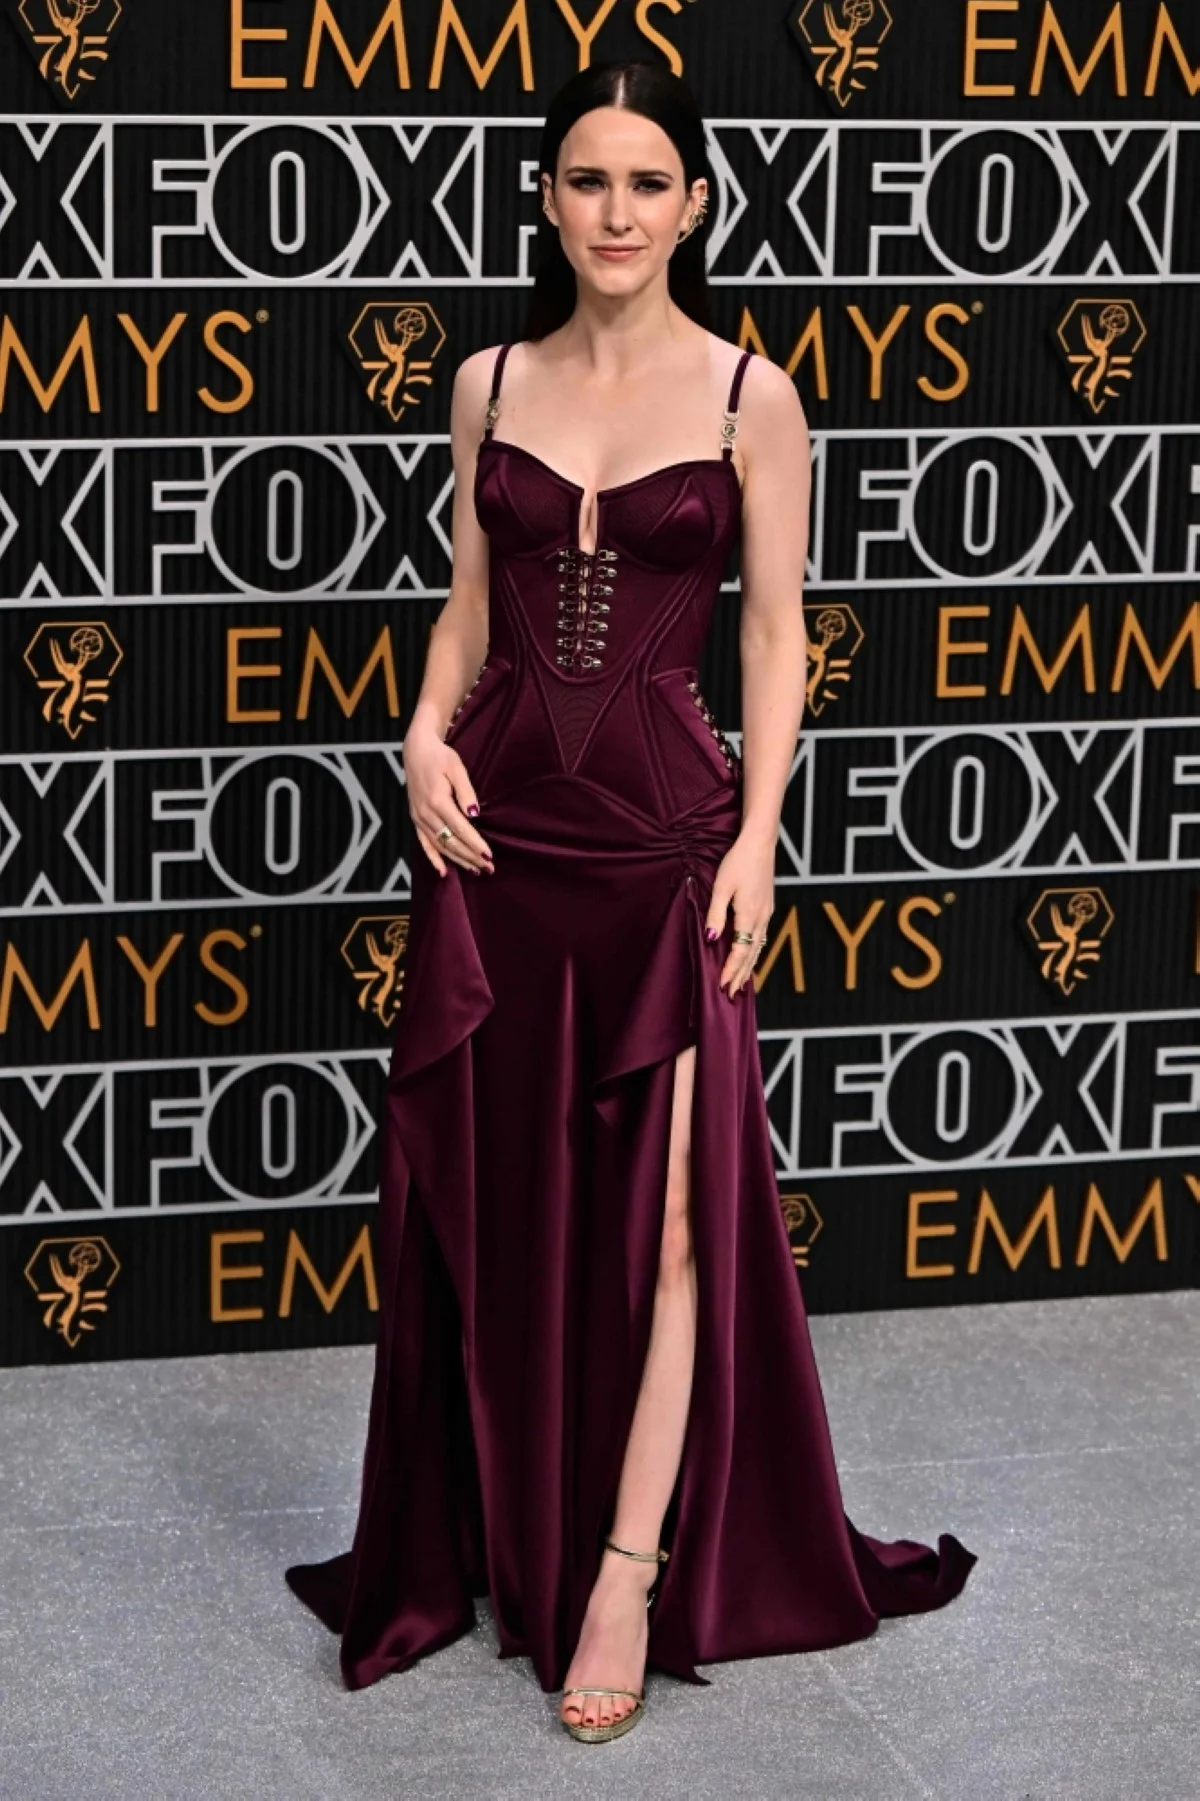 Emmys fashion: Red, black and purple all the rage | kuwaittimes